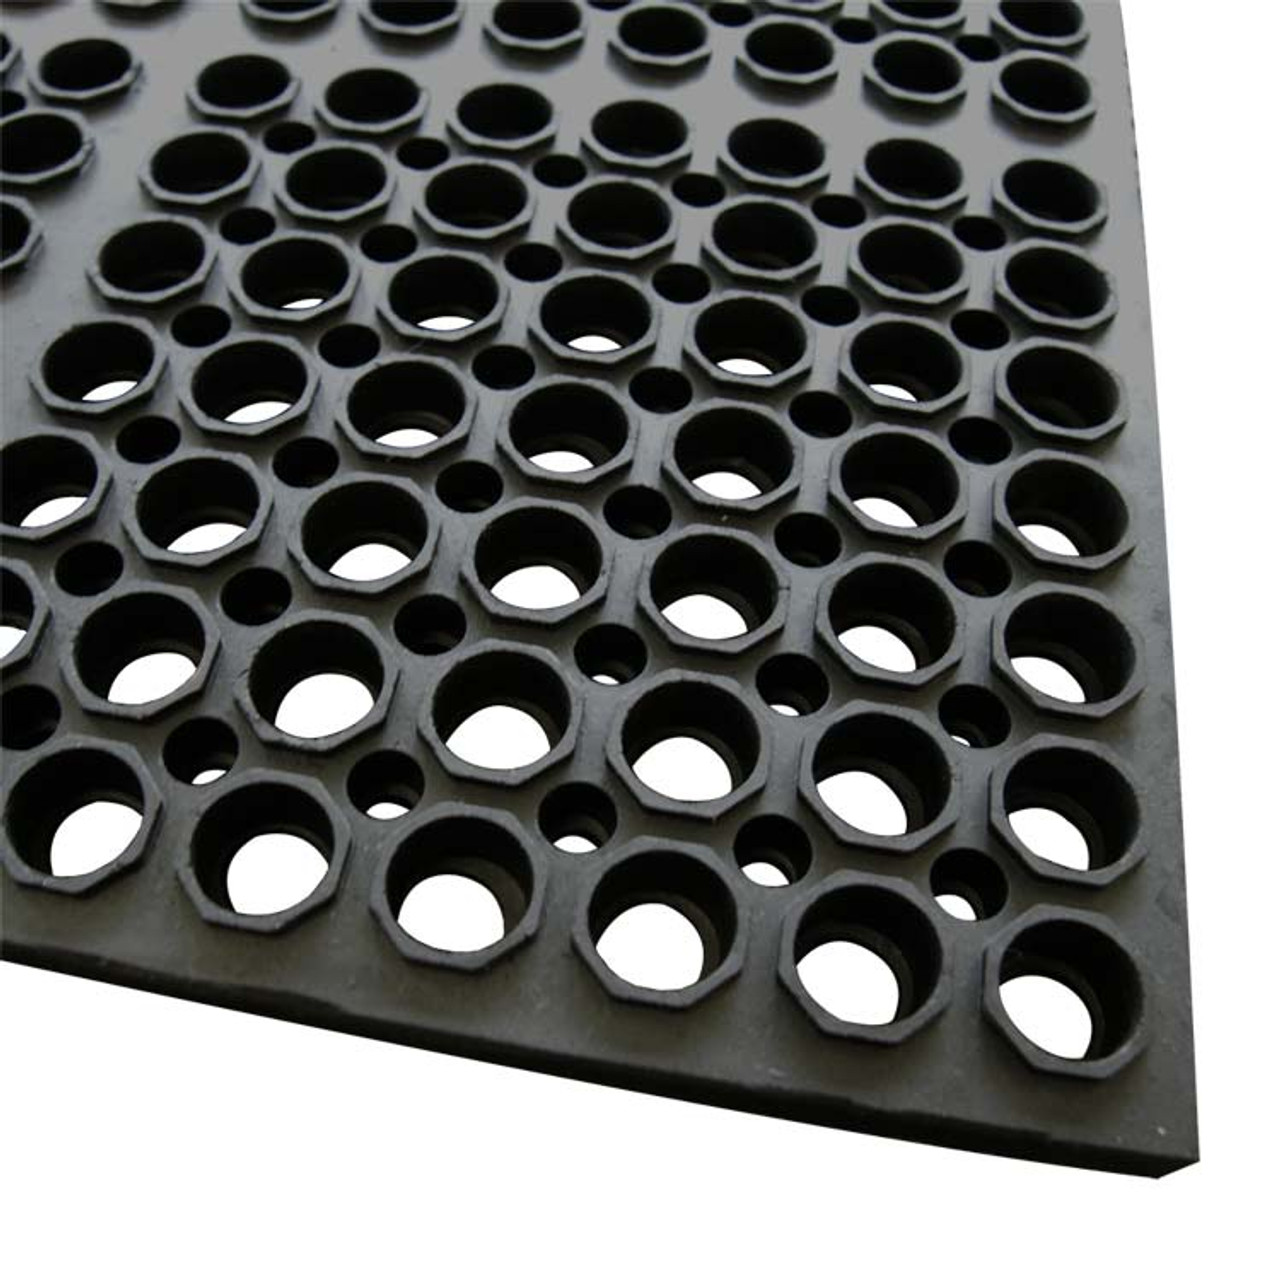 Interlocking Anti-fatigue Perforated Rubber Floor Mat Utility Mats - Buy  Interlocking Anti-fatigue Perforated Rubber Floor Mat Utility Mats Product  on